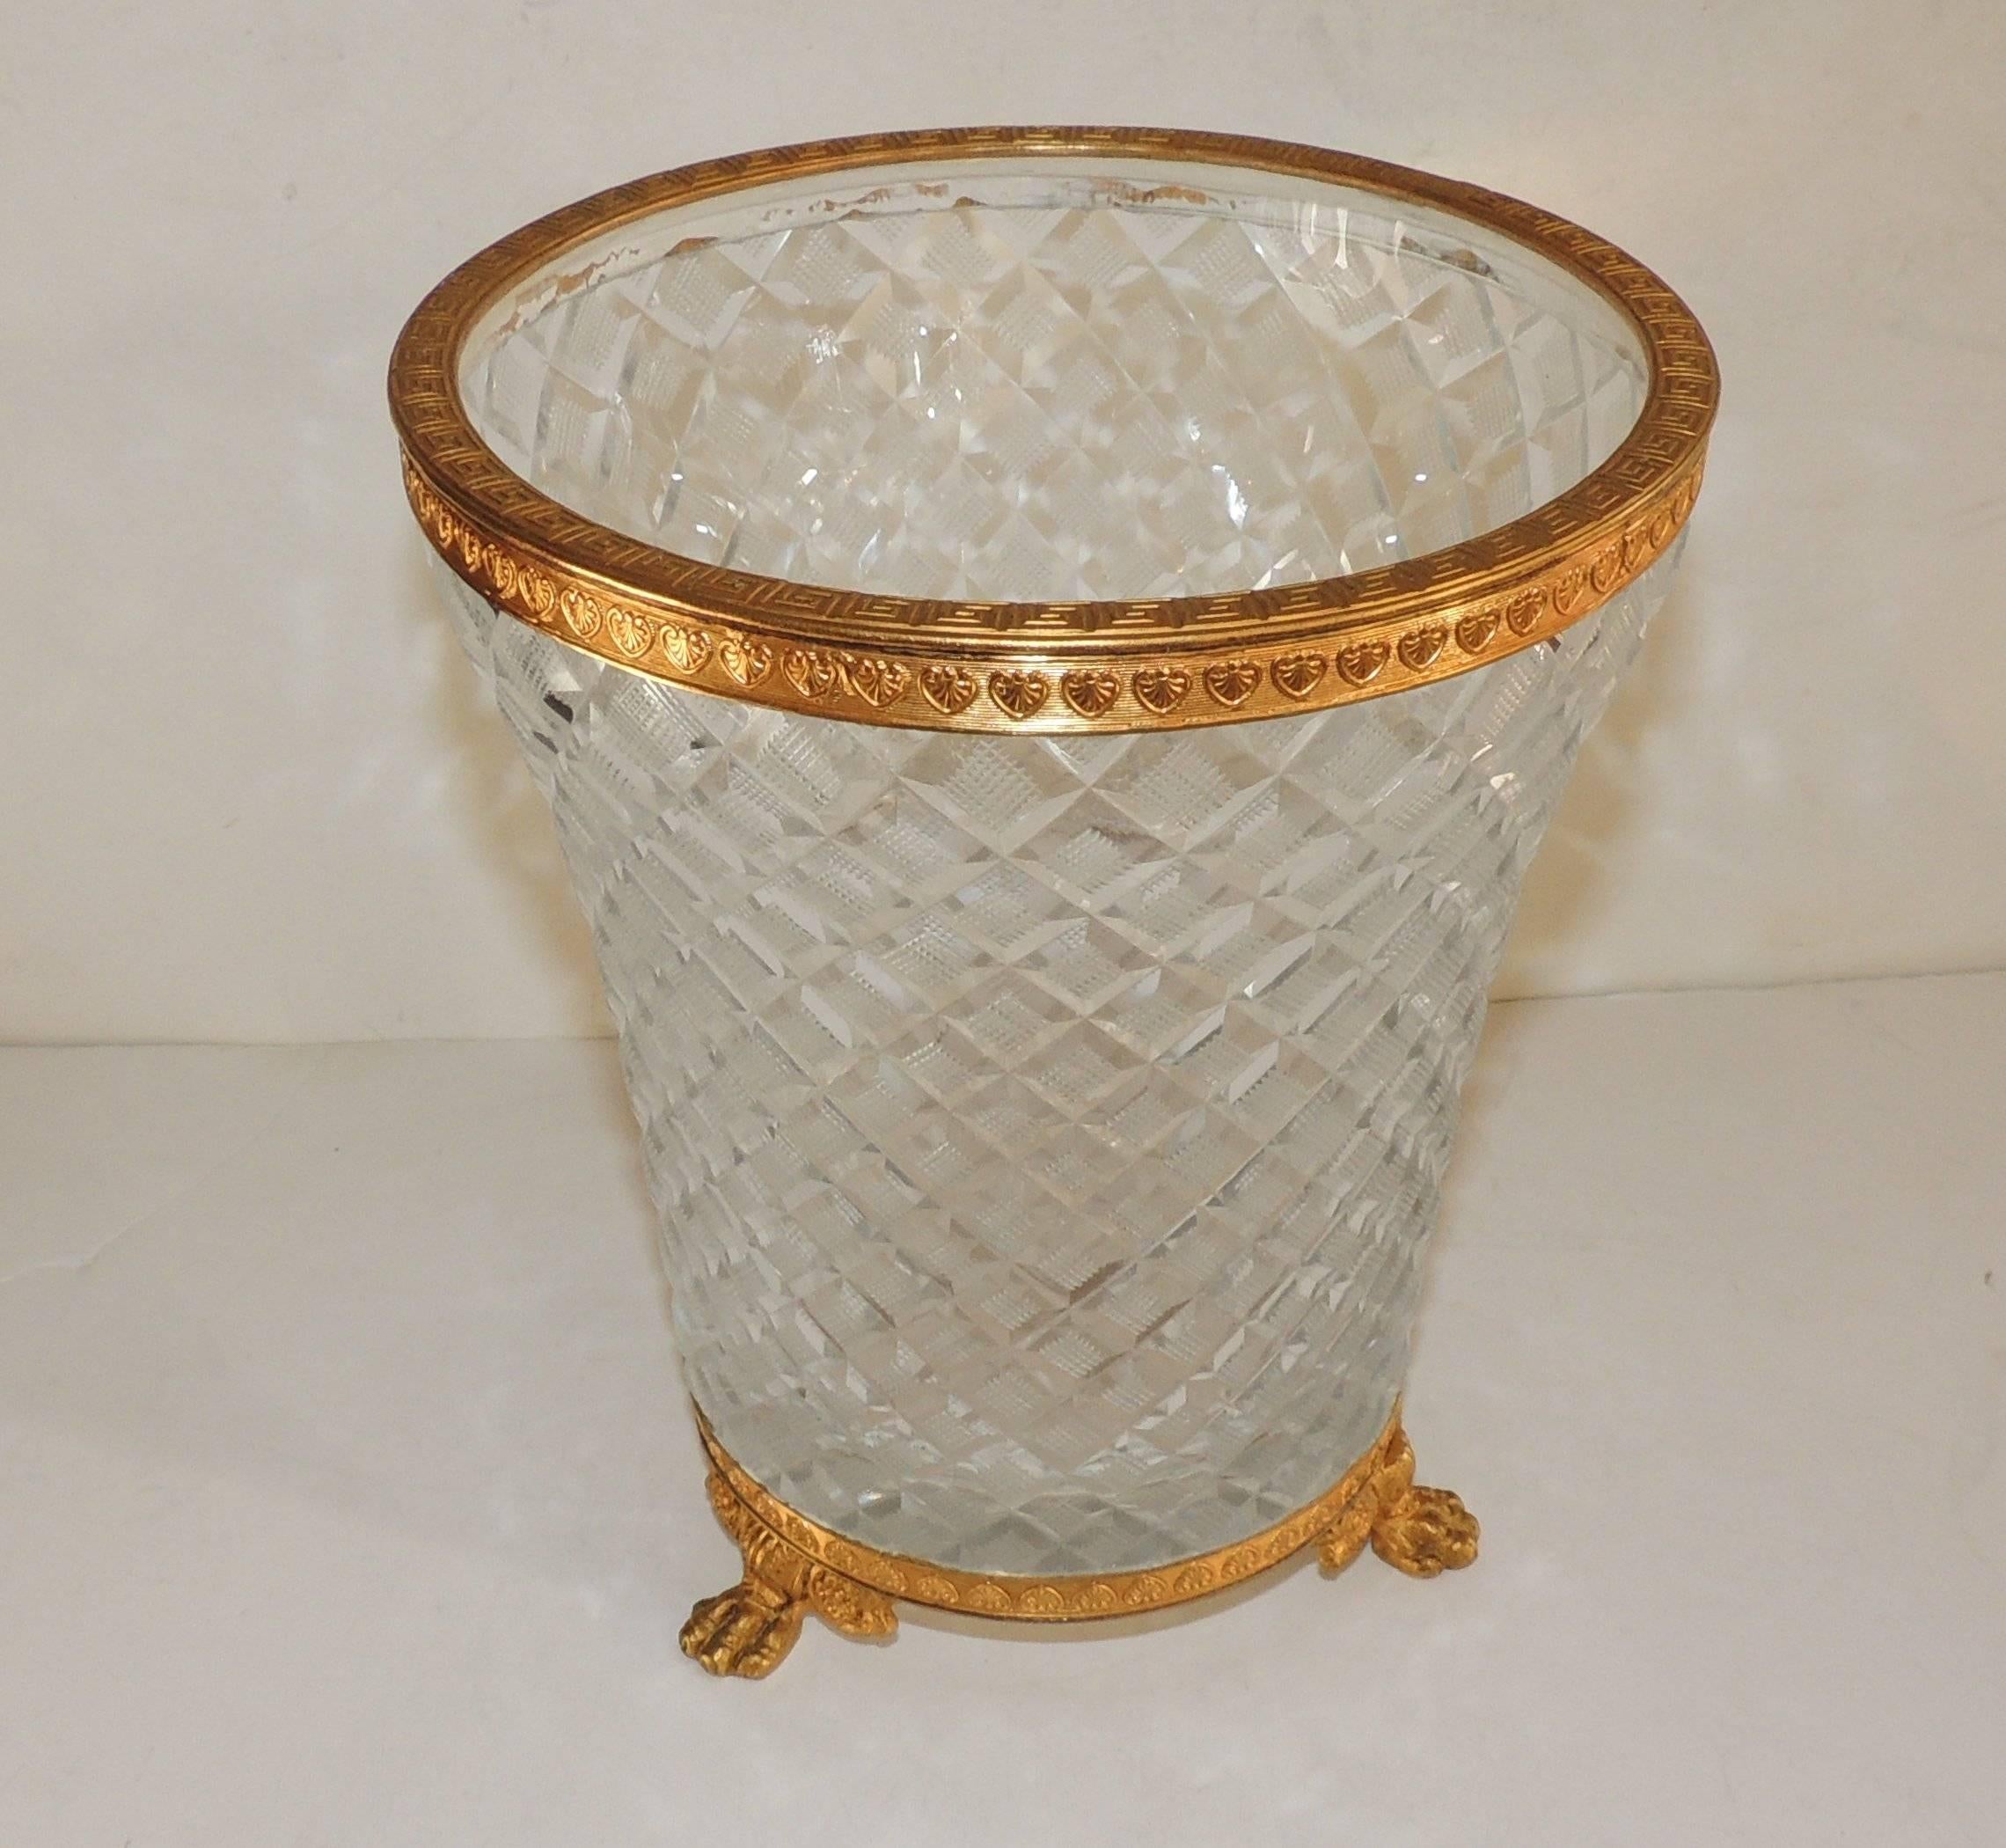 Wonderful French etched Greek key design and leaf design decorate the top and bottom of the doré bronze trim ending with 3 paw feet. Lovely etched diamond cut crystal ice bucket or can also be used as a vase.
In the manner of Baccarat 
Measures: